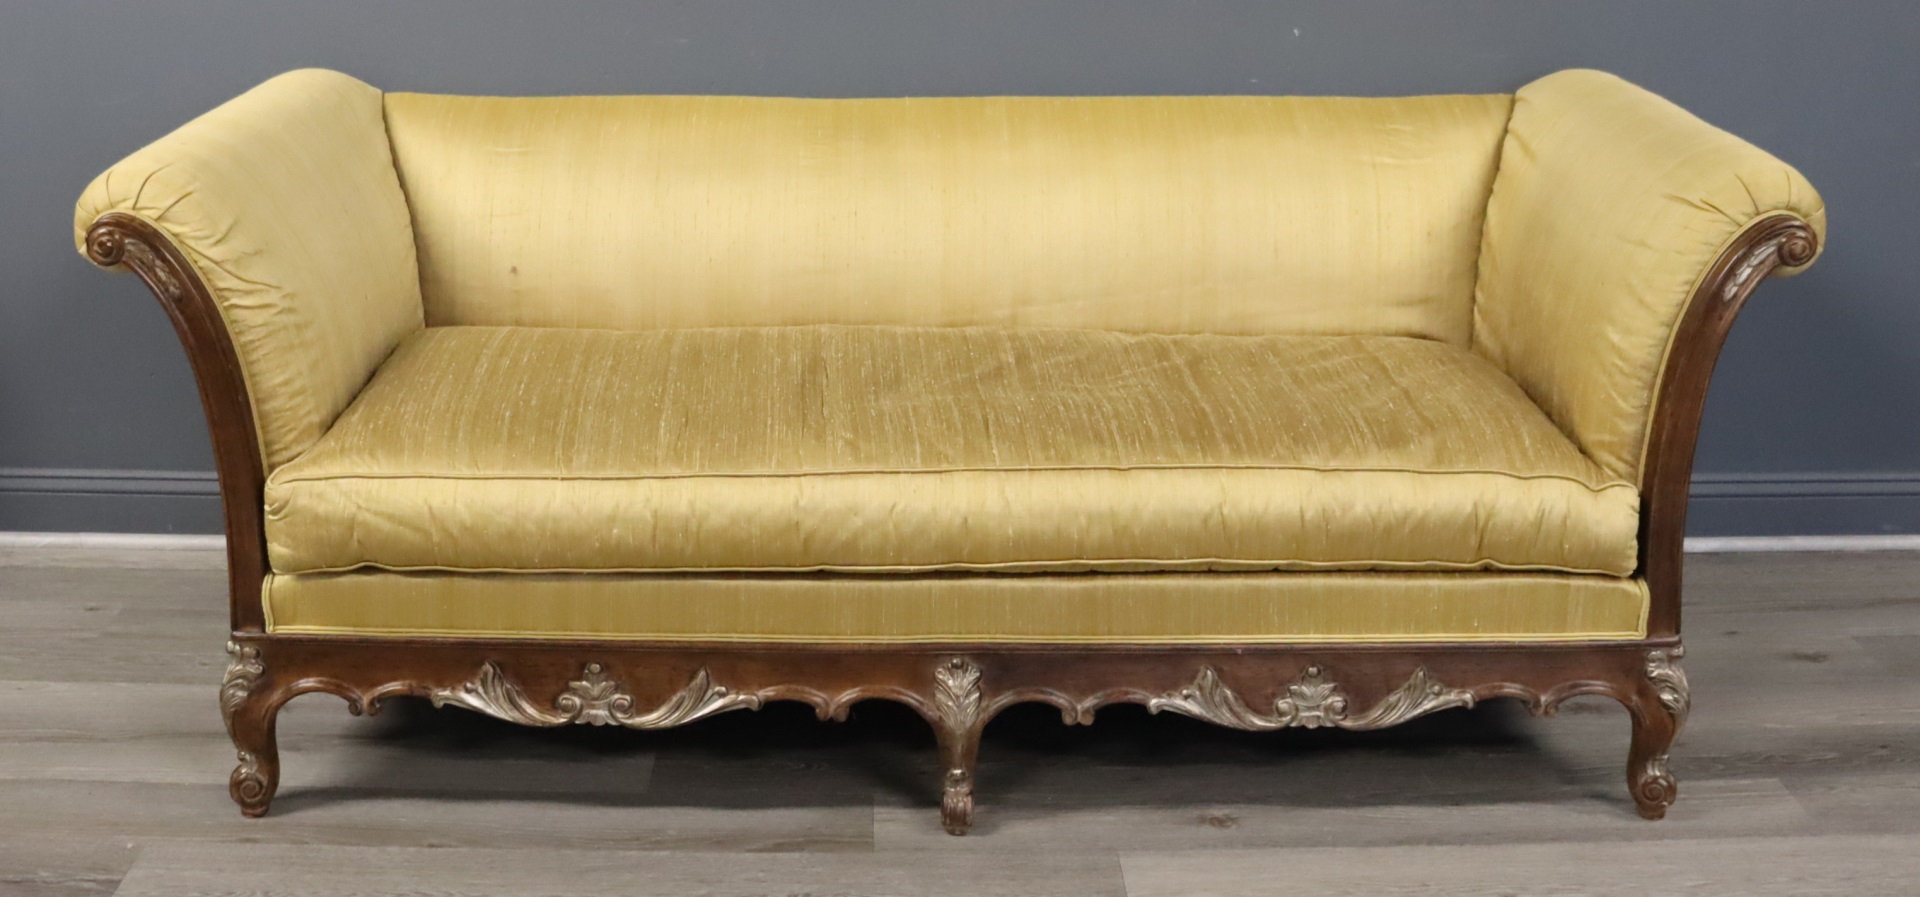 VINTAGE AND FINE QUALITY UPHOLSTERED